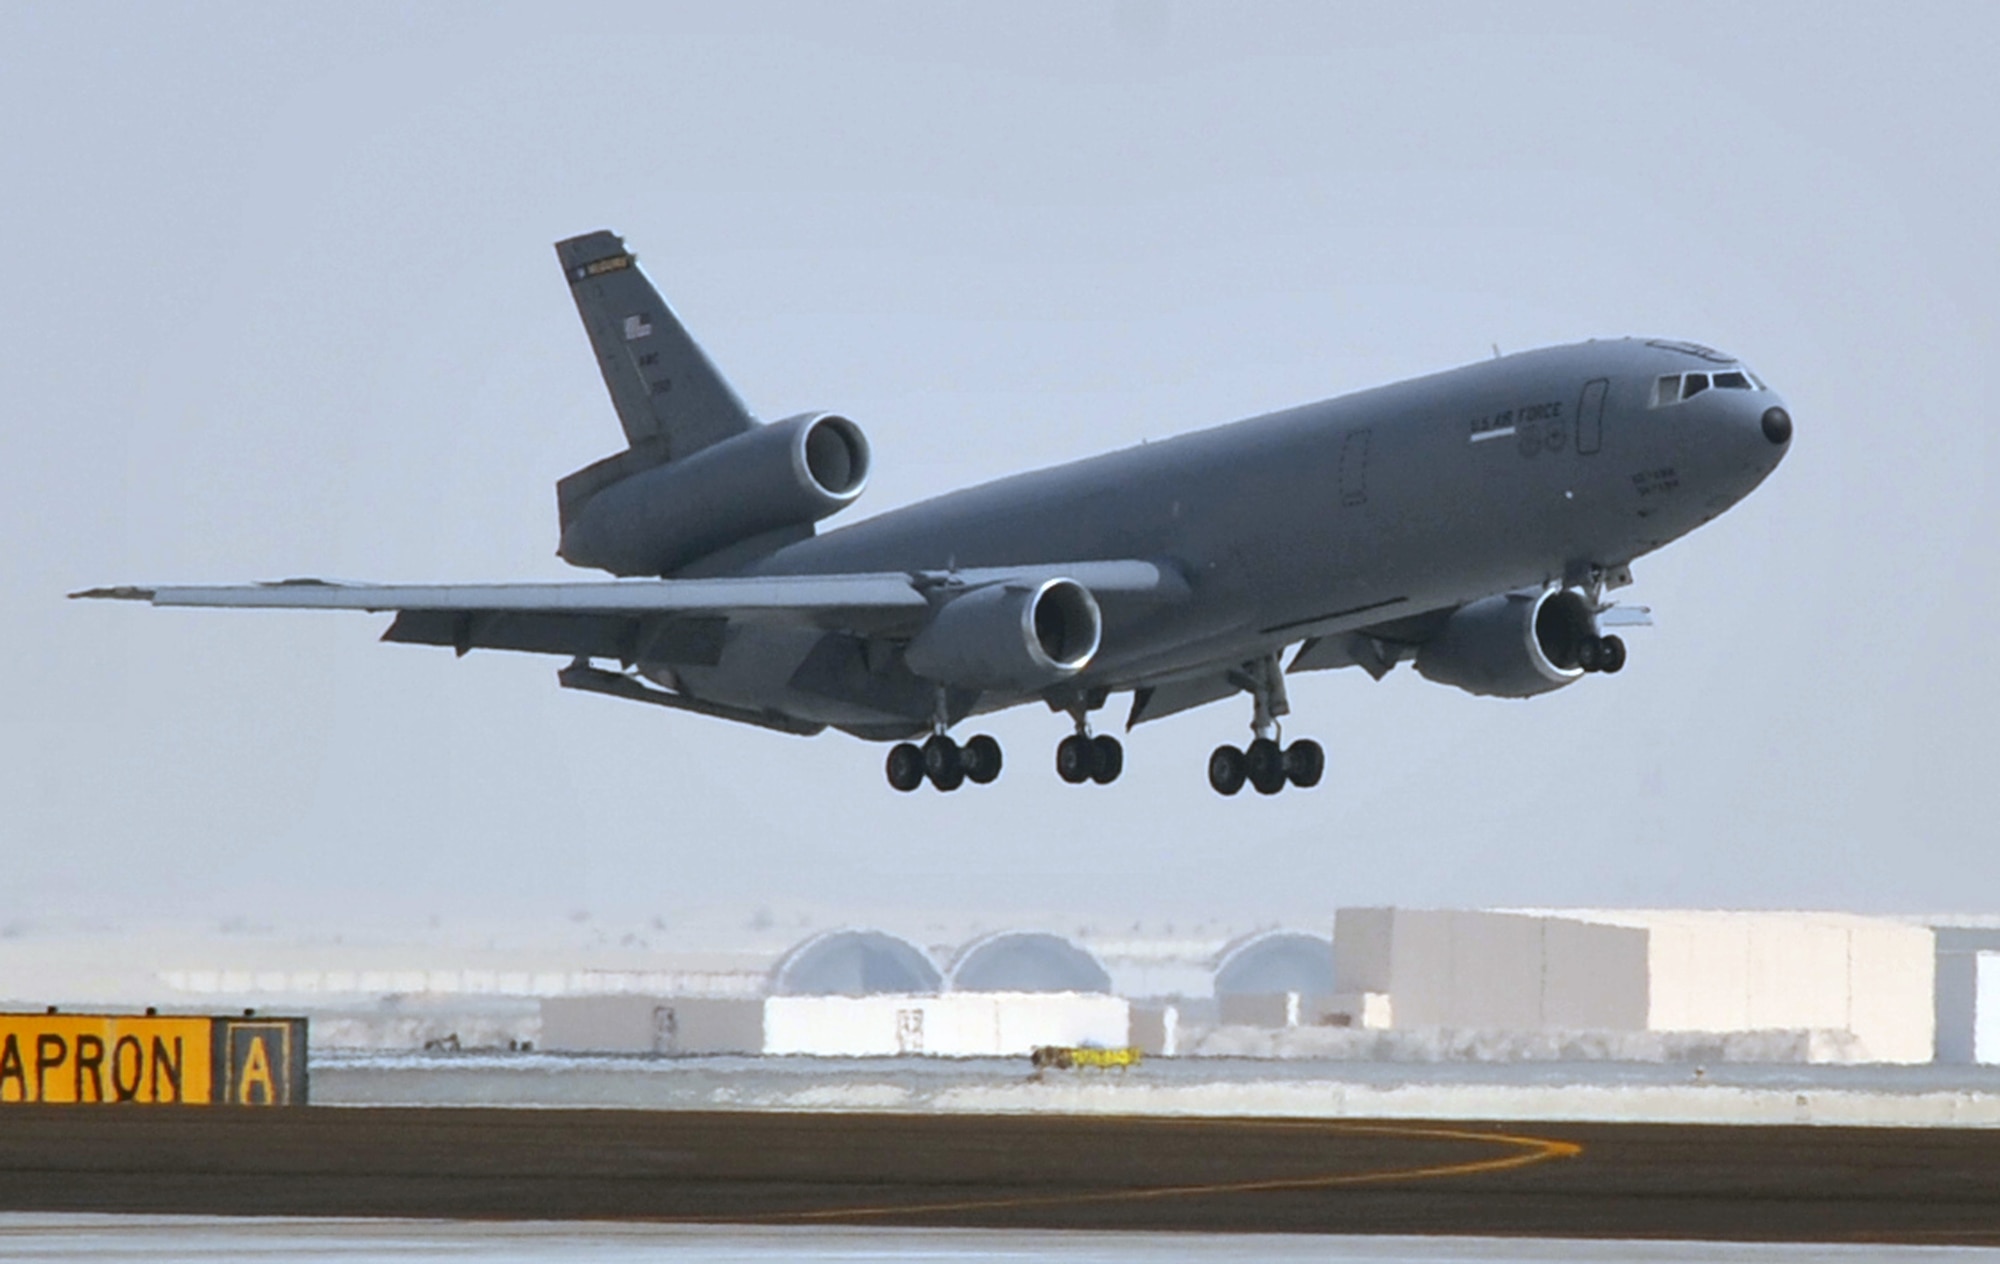 A flight crew from the 908th Expeditionary Air Refueling Squadron brings a KC-10 Extender in for a landing June 7, 2010, after completing a combat mission in the U.S. Central Command area of responsibility. The 908th EARS, as part of the 380th Air Expeditionary Wing, supports operations Iraqi Freedom, Enduring Freedom, and the Combined Joint Task Force-Horn of Africa. (U.S. Air Force Photo/Master Sgt. Scott T. Sturkol/Released)